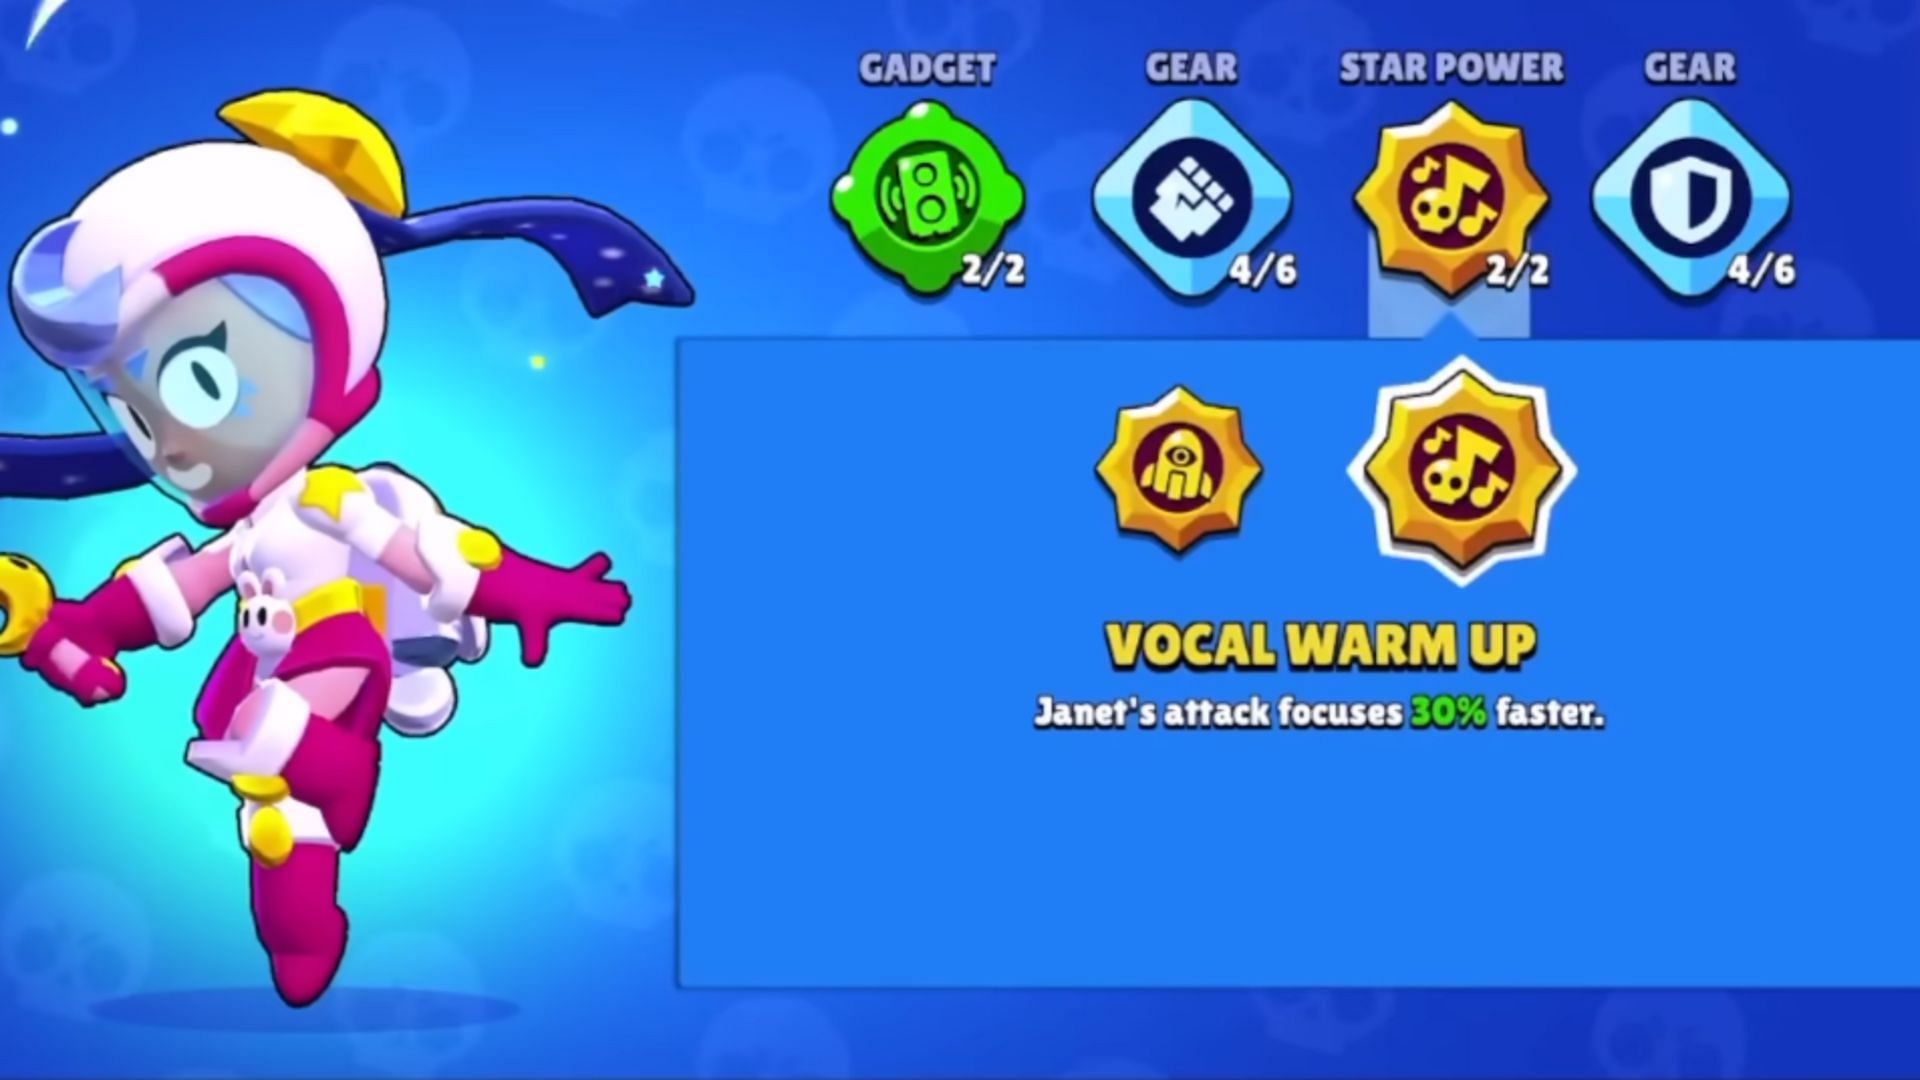 The Vocal Warm Up Star Power (Image via Supercell)